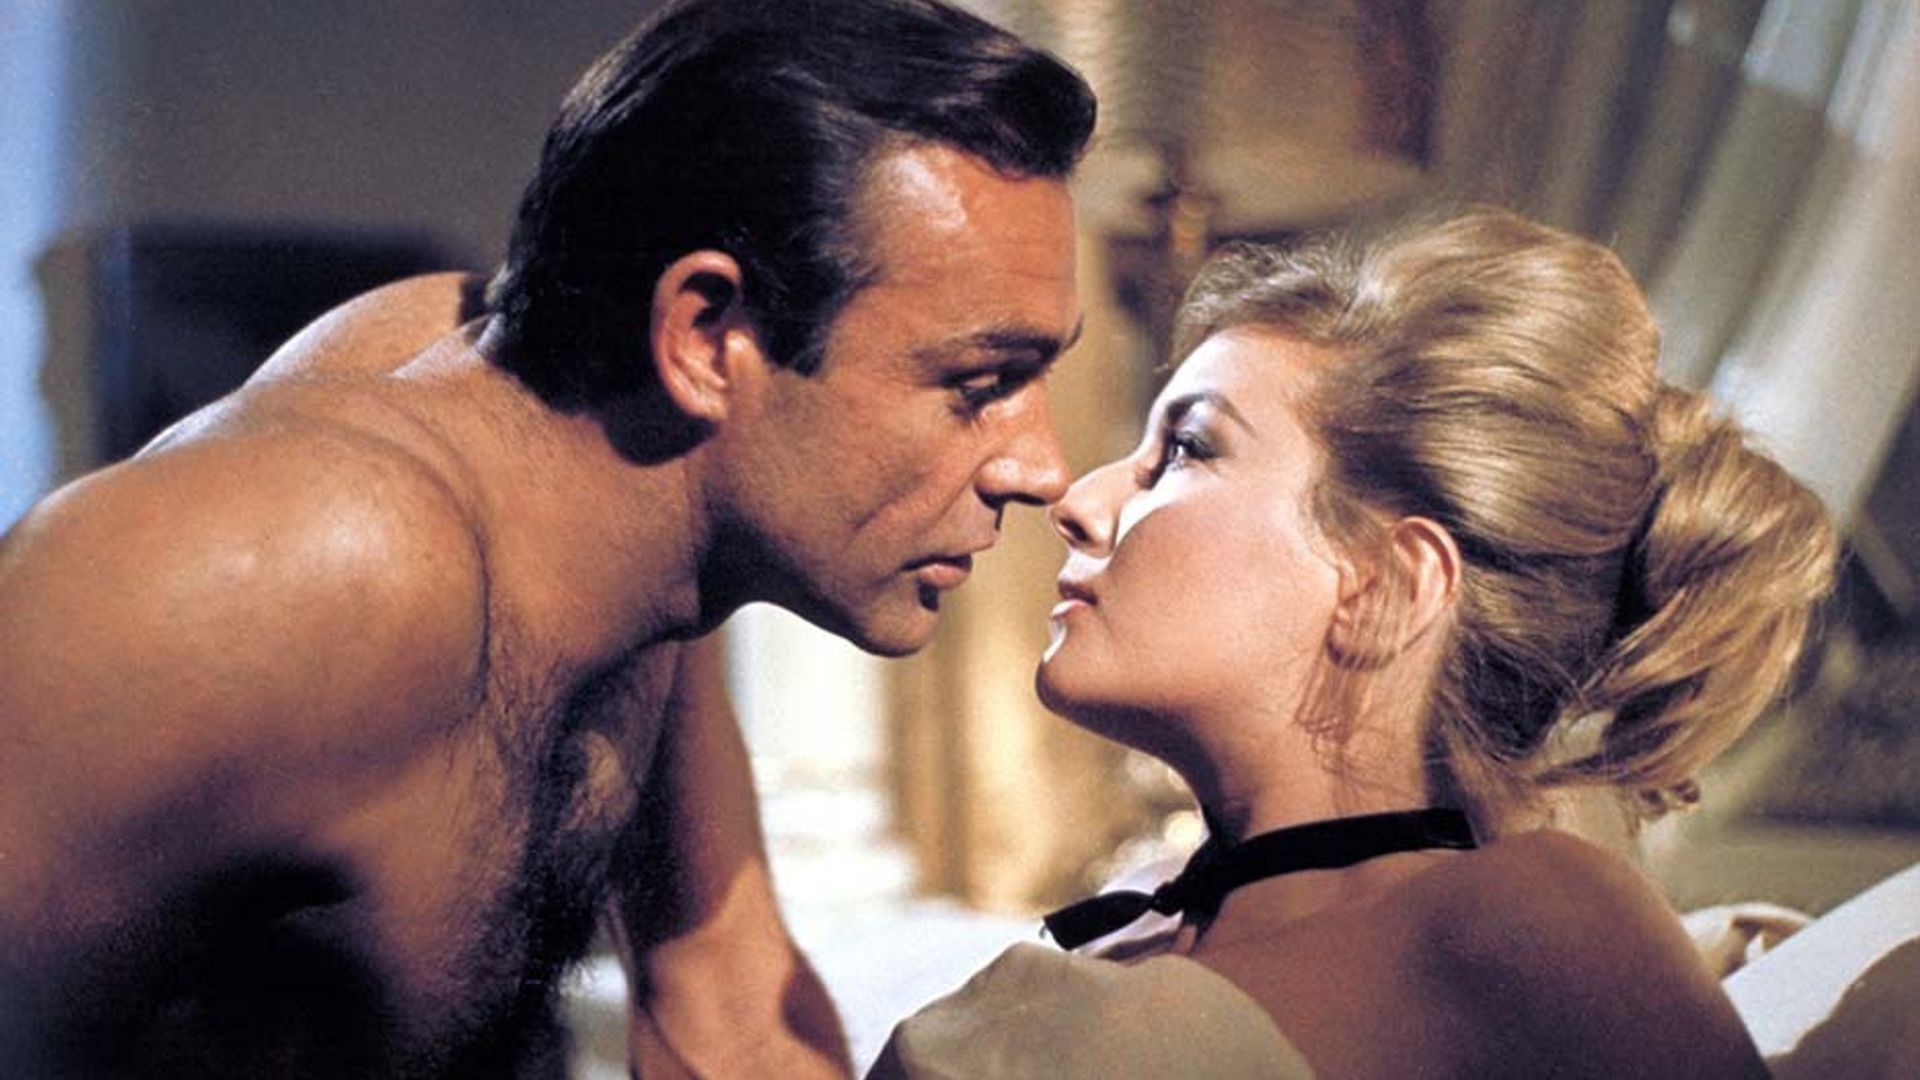 11 of the steamiest Bond scenes ever